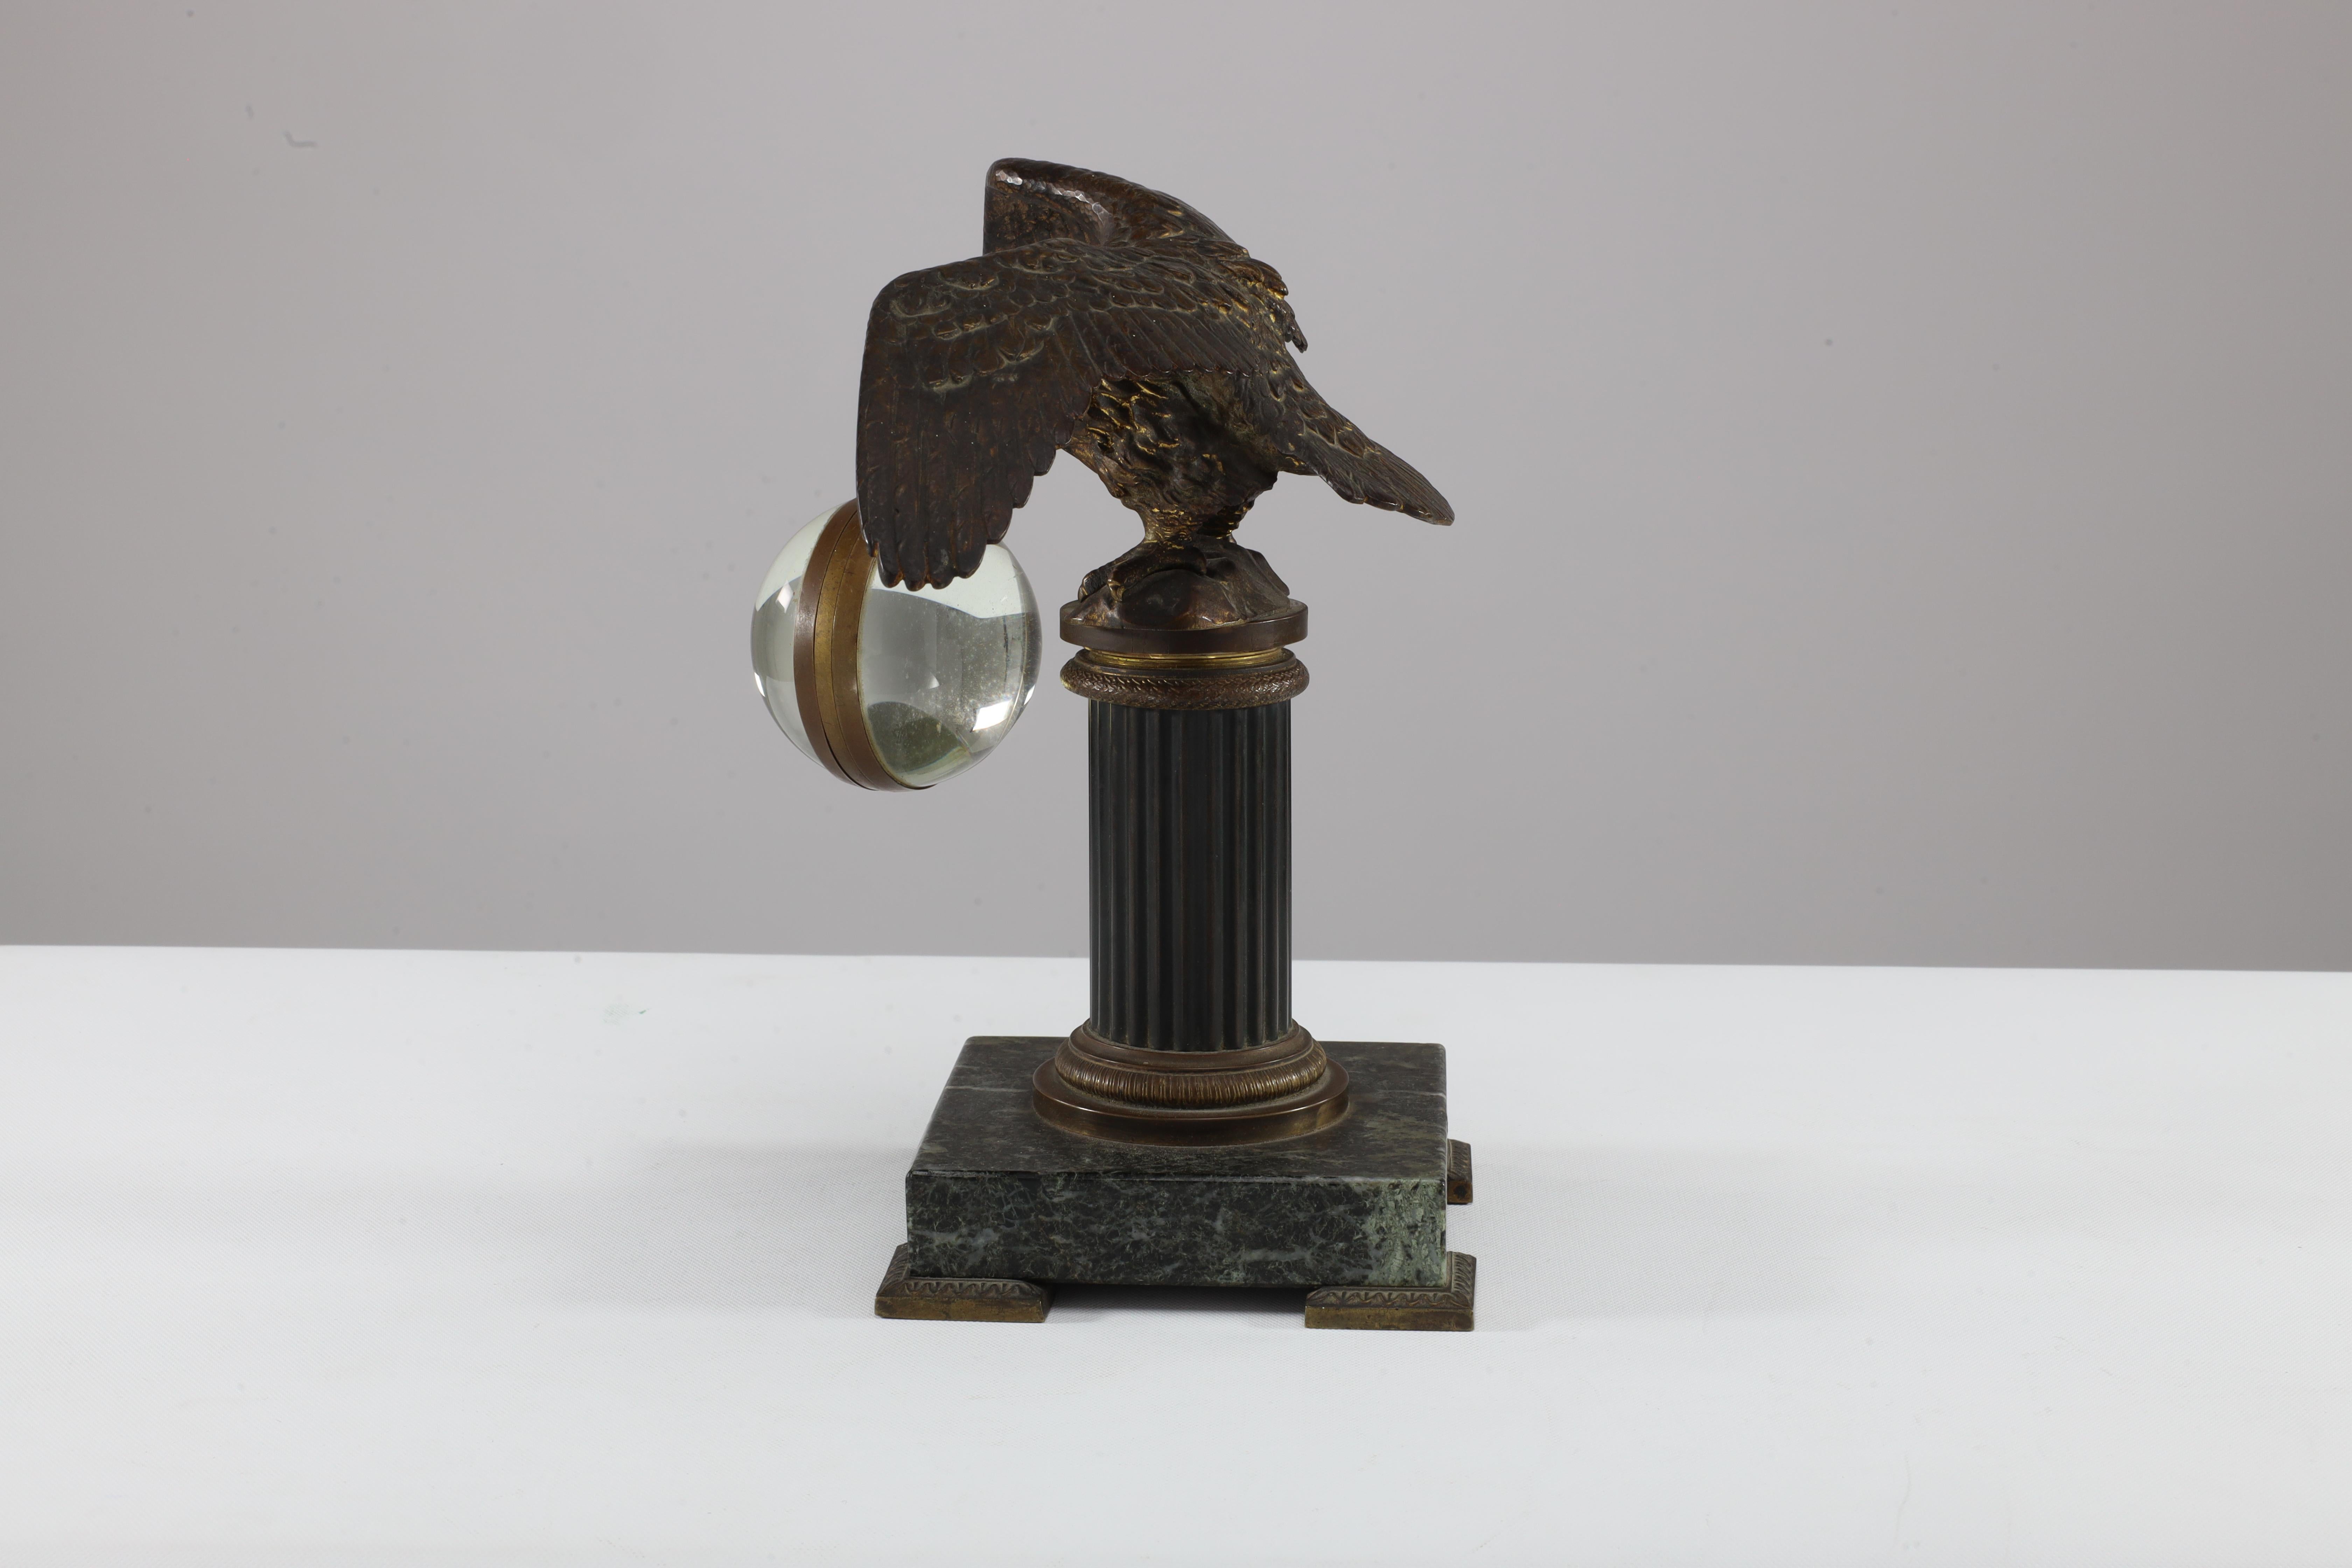 French gilt bronze fob watch holder with an eagle and her wings spread apart about to take off from a corinthium column on a square marble base with bronze feet, indistinctly signed with the french word 